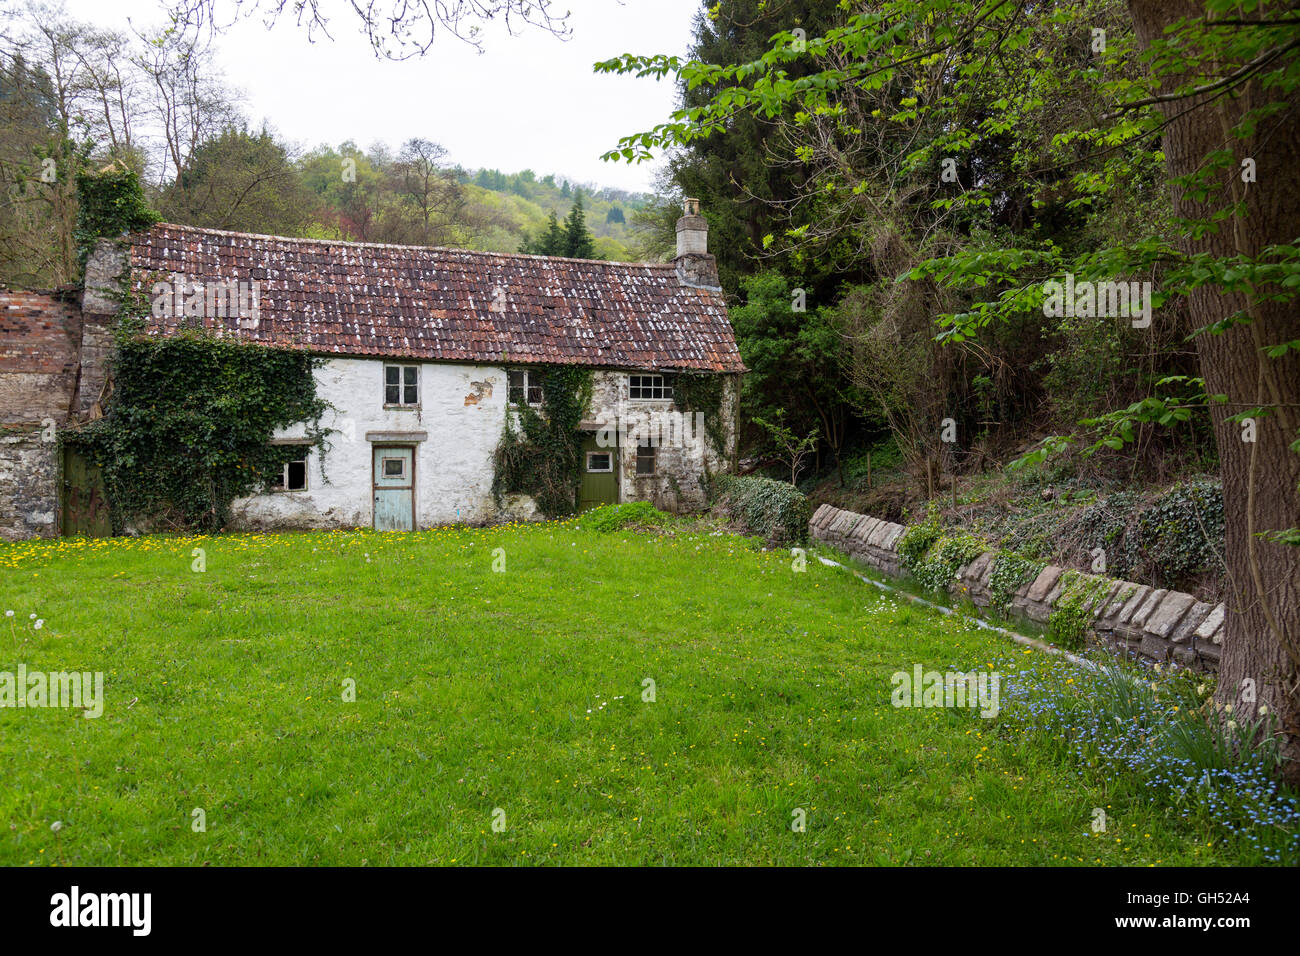 A derelict cottage in the village of Tintern on the River Wye, Monmouthshire, Wales, UK Stock Photo